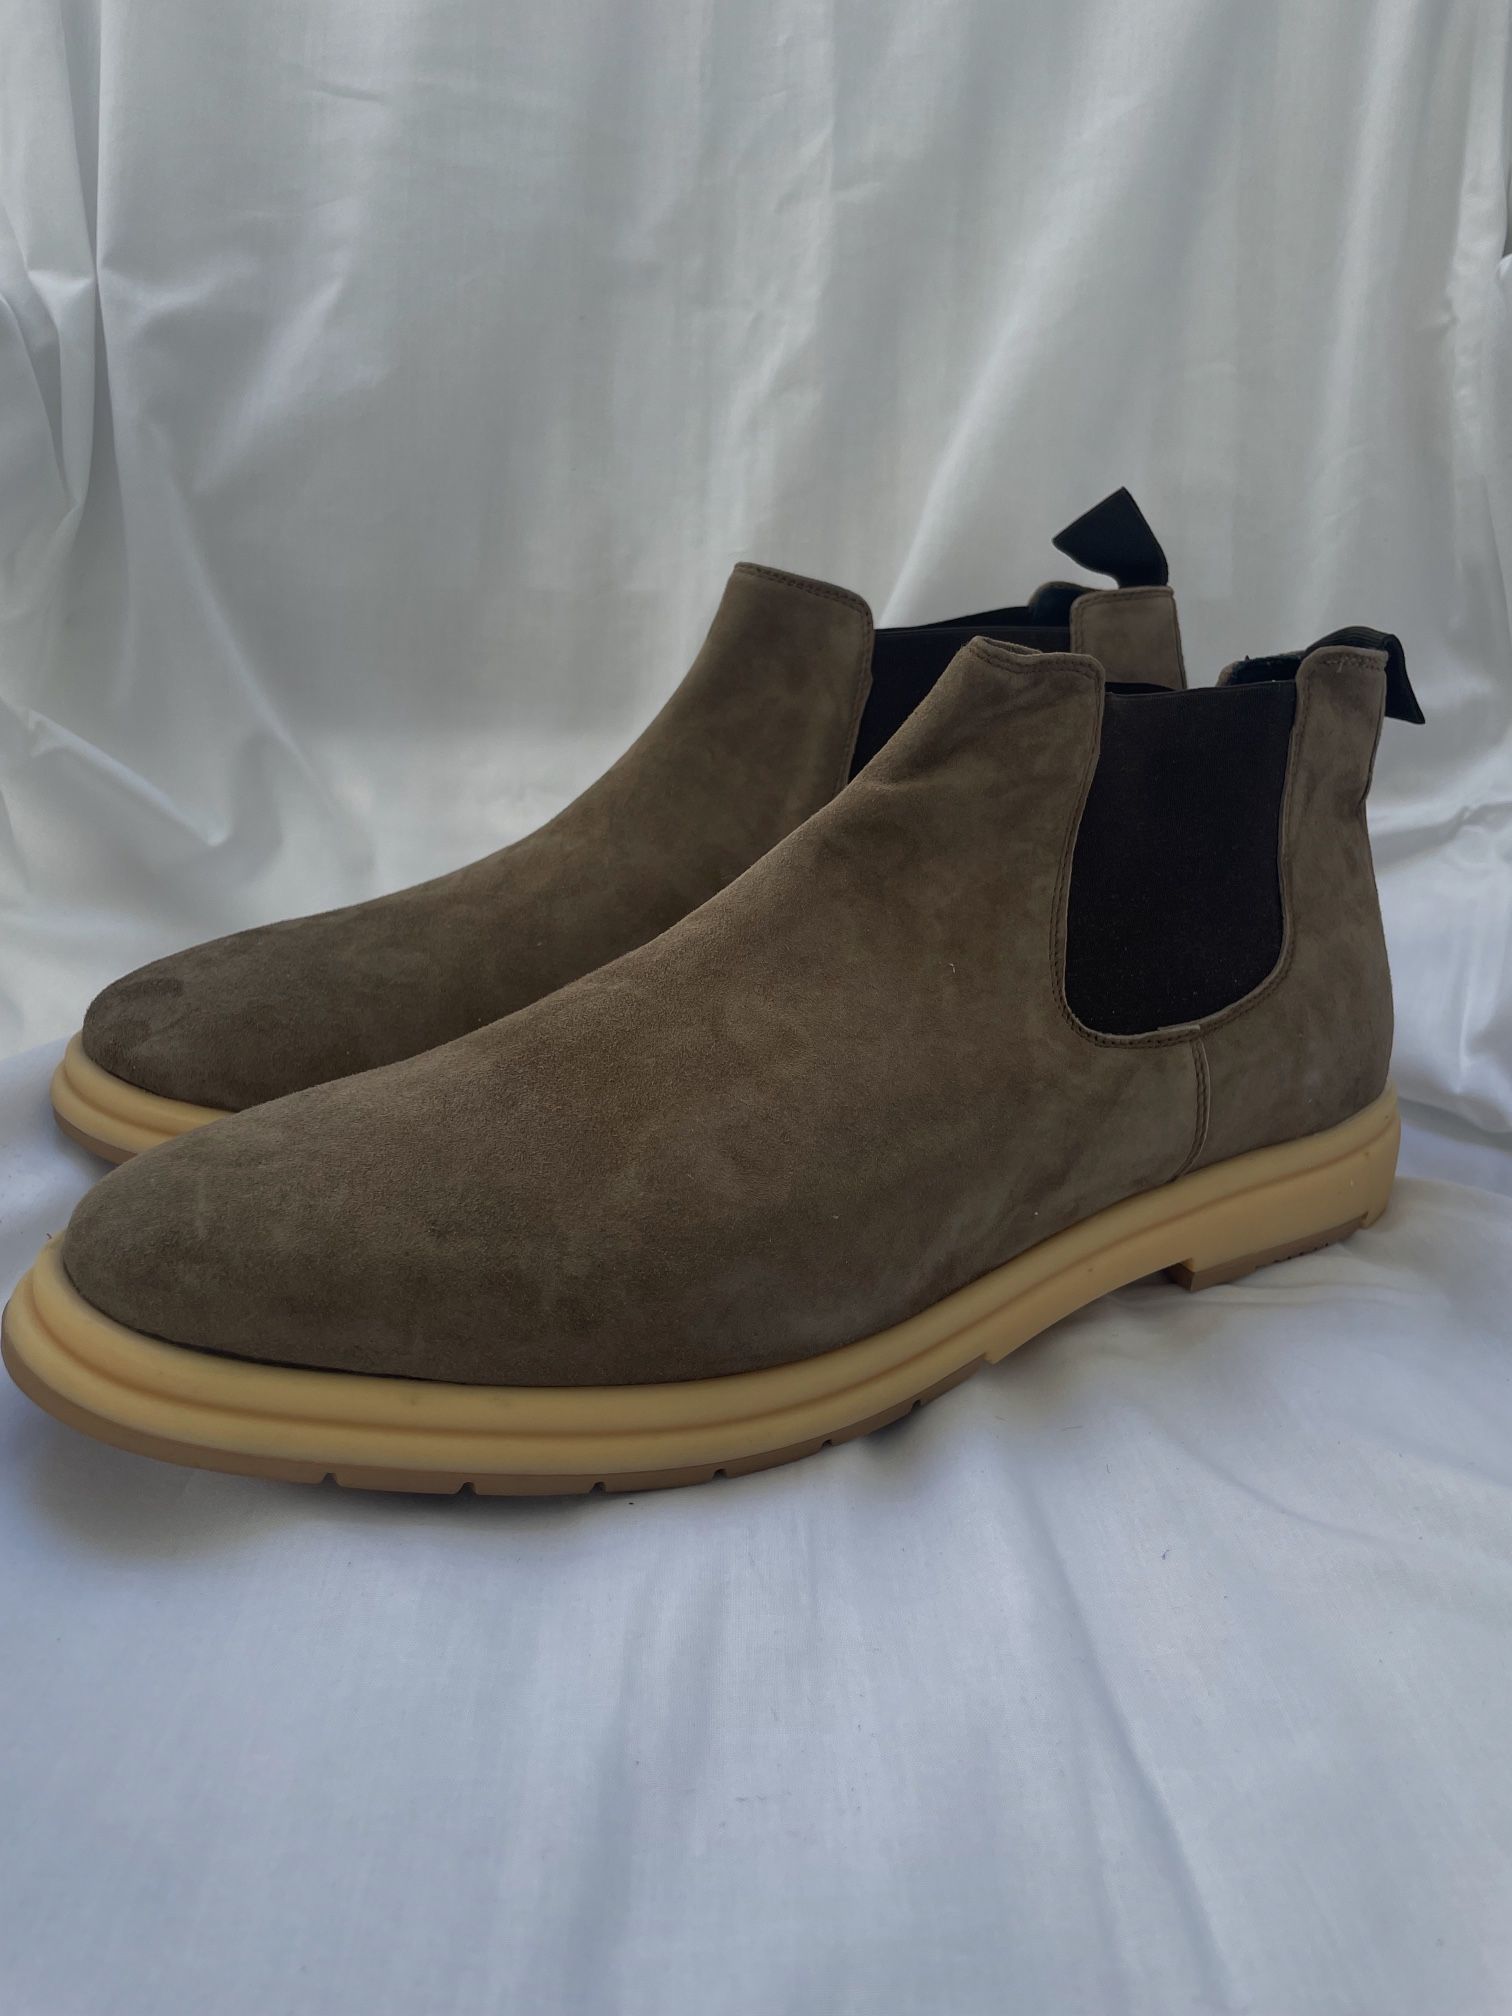 Fedeli Brown Boots